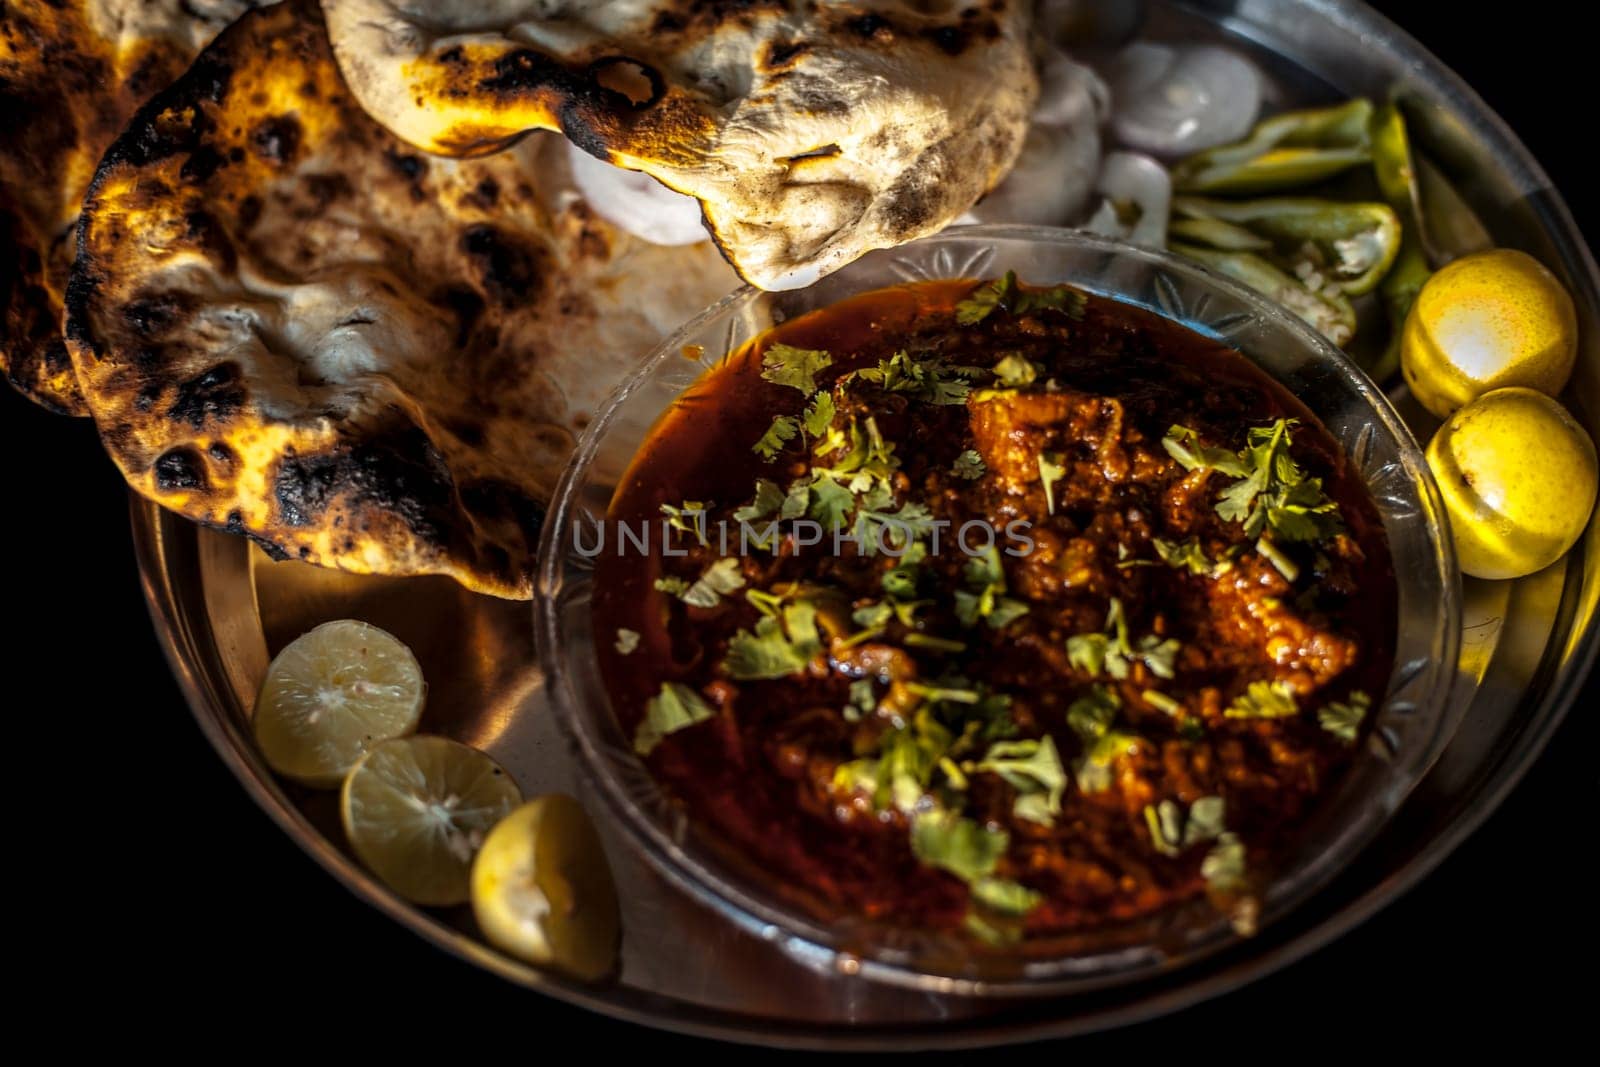 Shot of Achari Chicken along with tandoori roti with it on a serving plate with some chilies, onions, and lemons. by mirzamlk